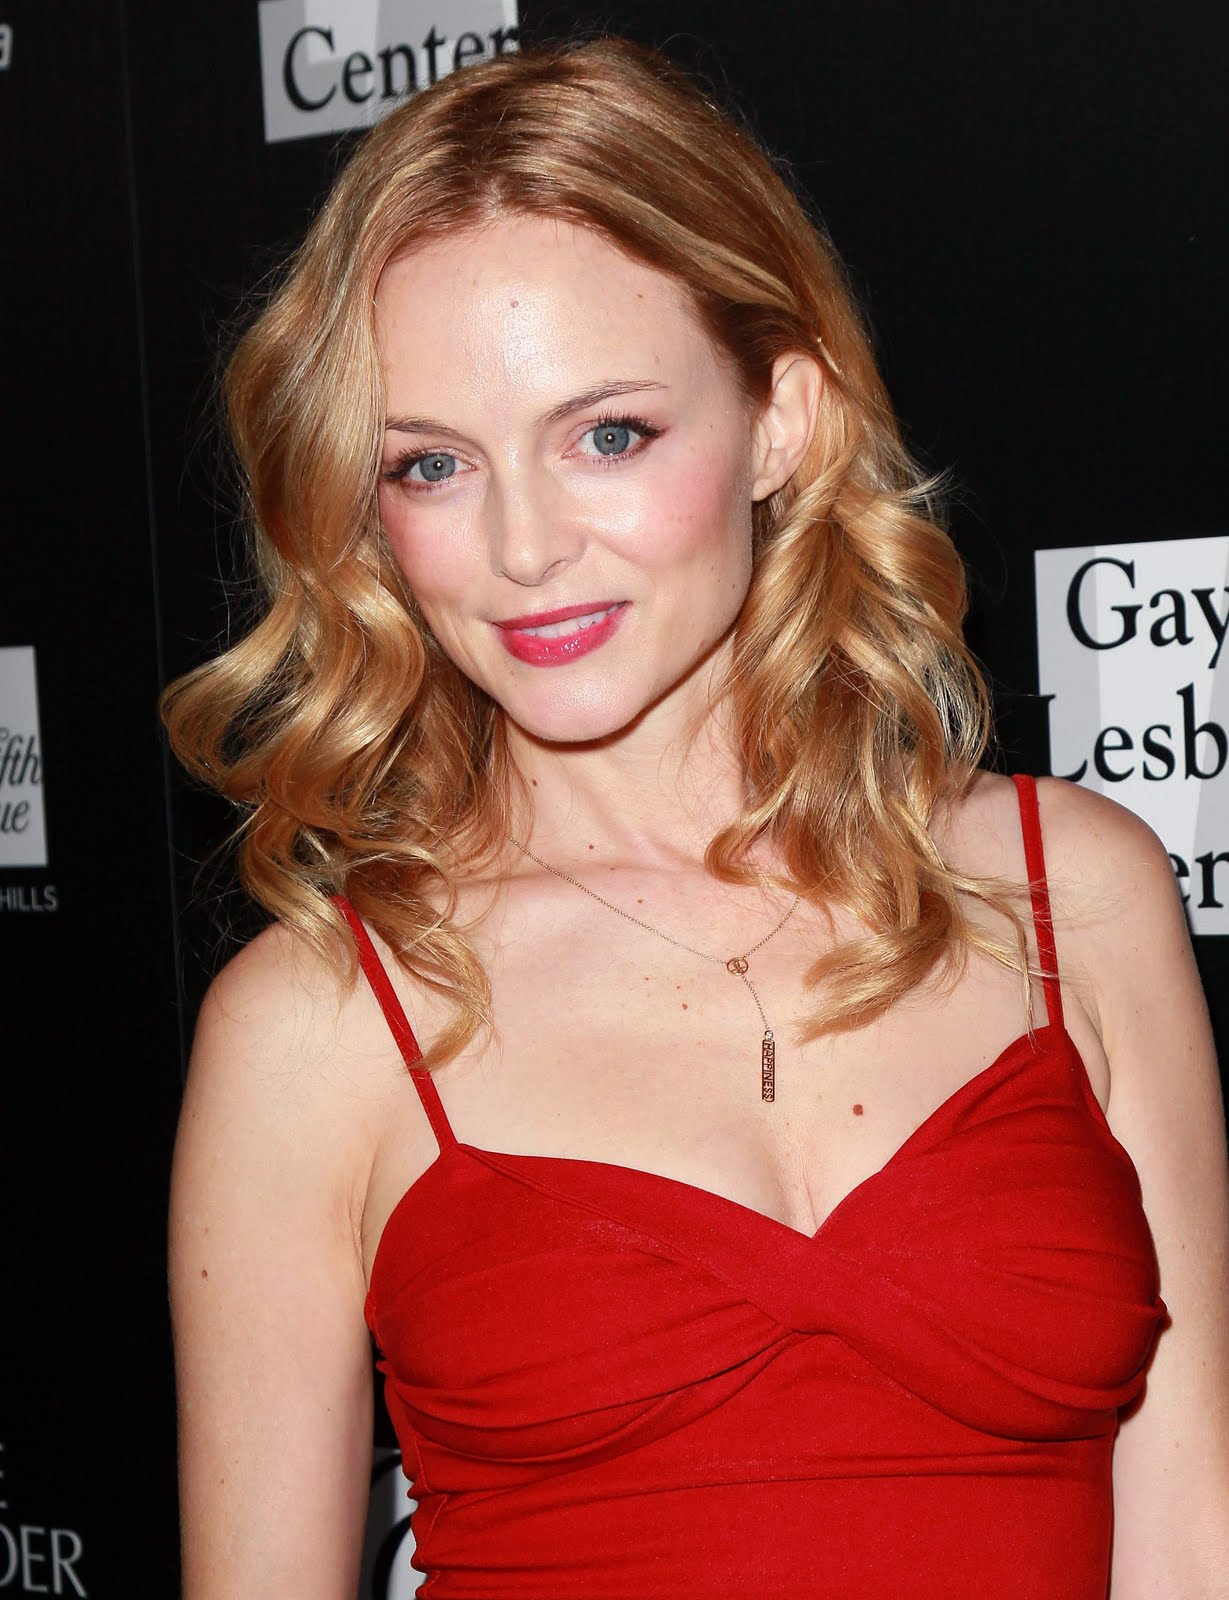 Heather Graham looks pretty good in Cocktail Dress